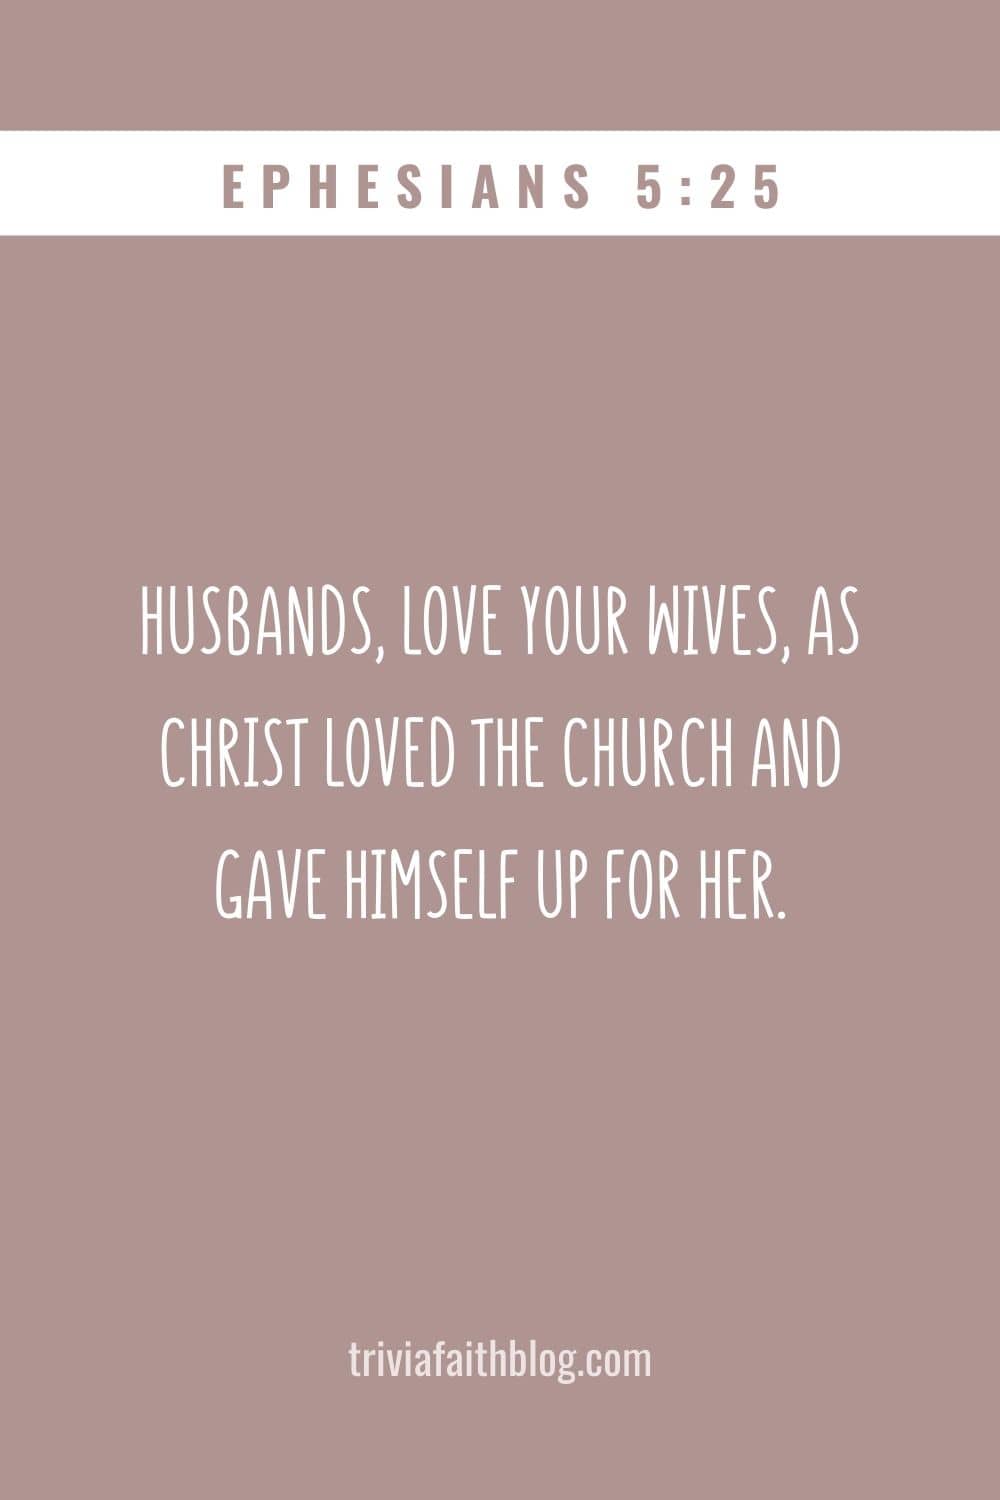 Husbands, love your wives, as Christ loved the church and gave himself up for her